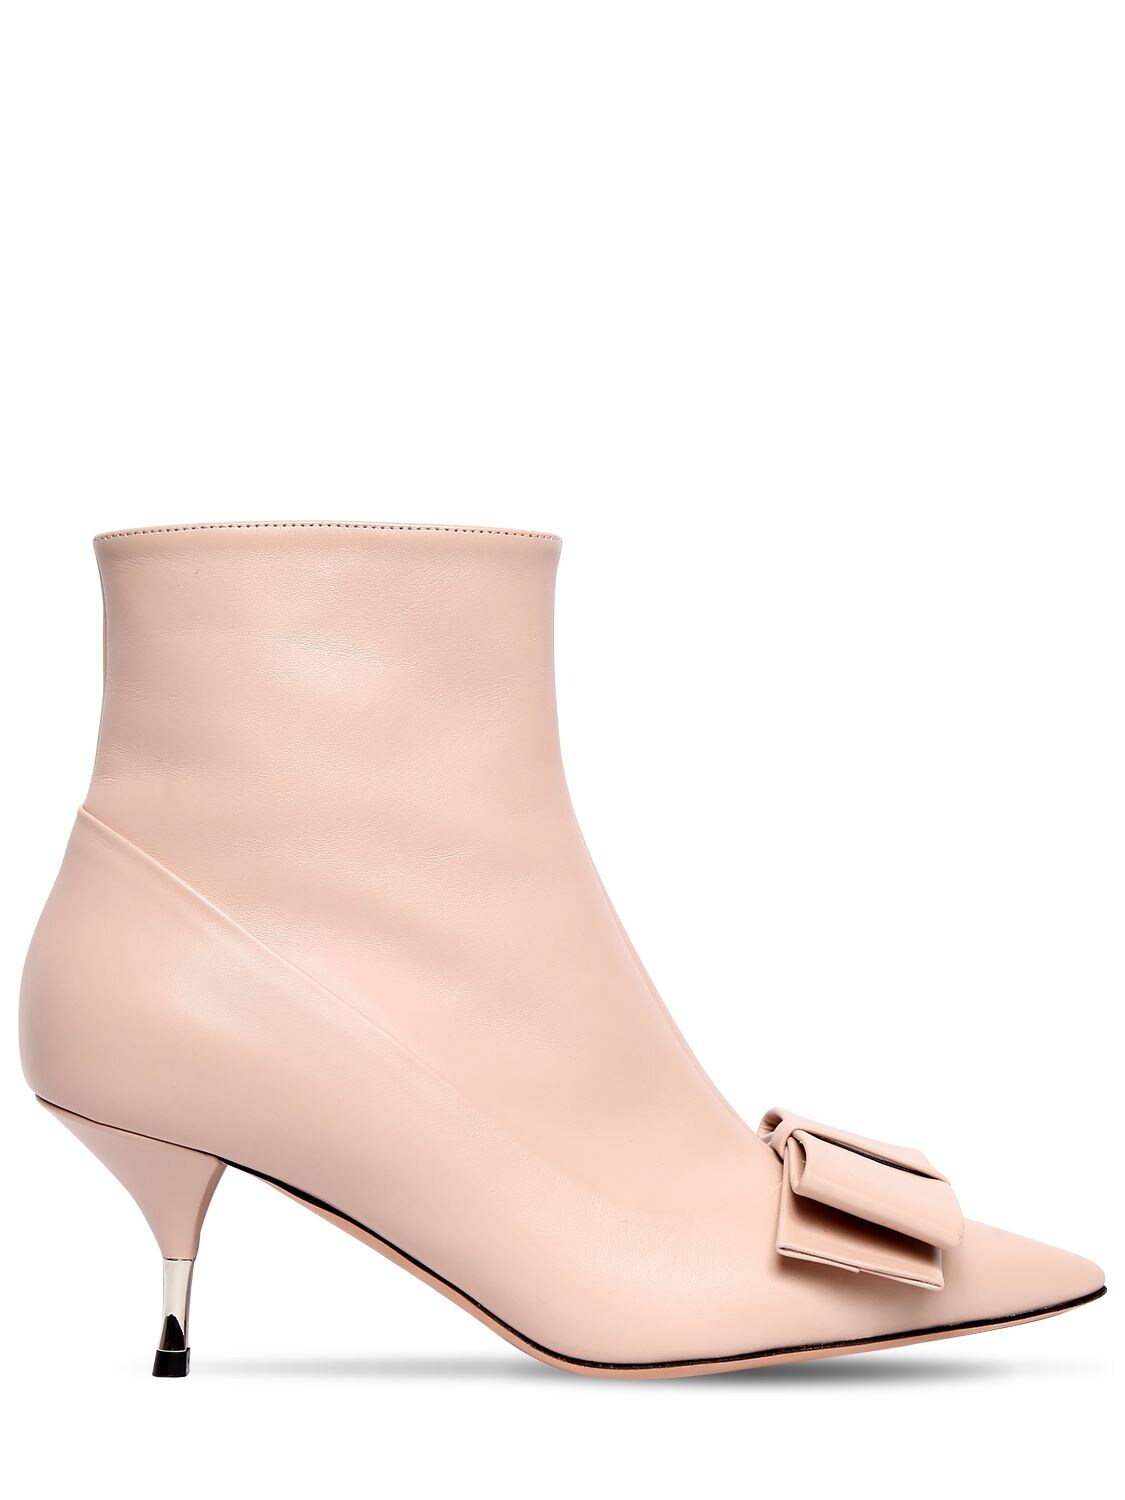 Rochas 60mm Bow Leather Ankle Boots In Nude